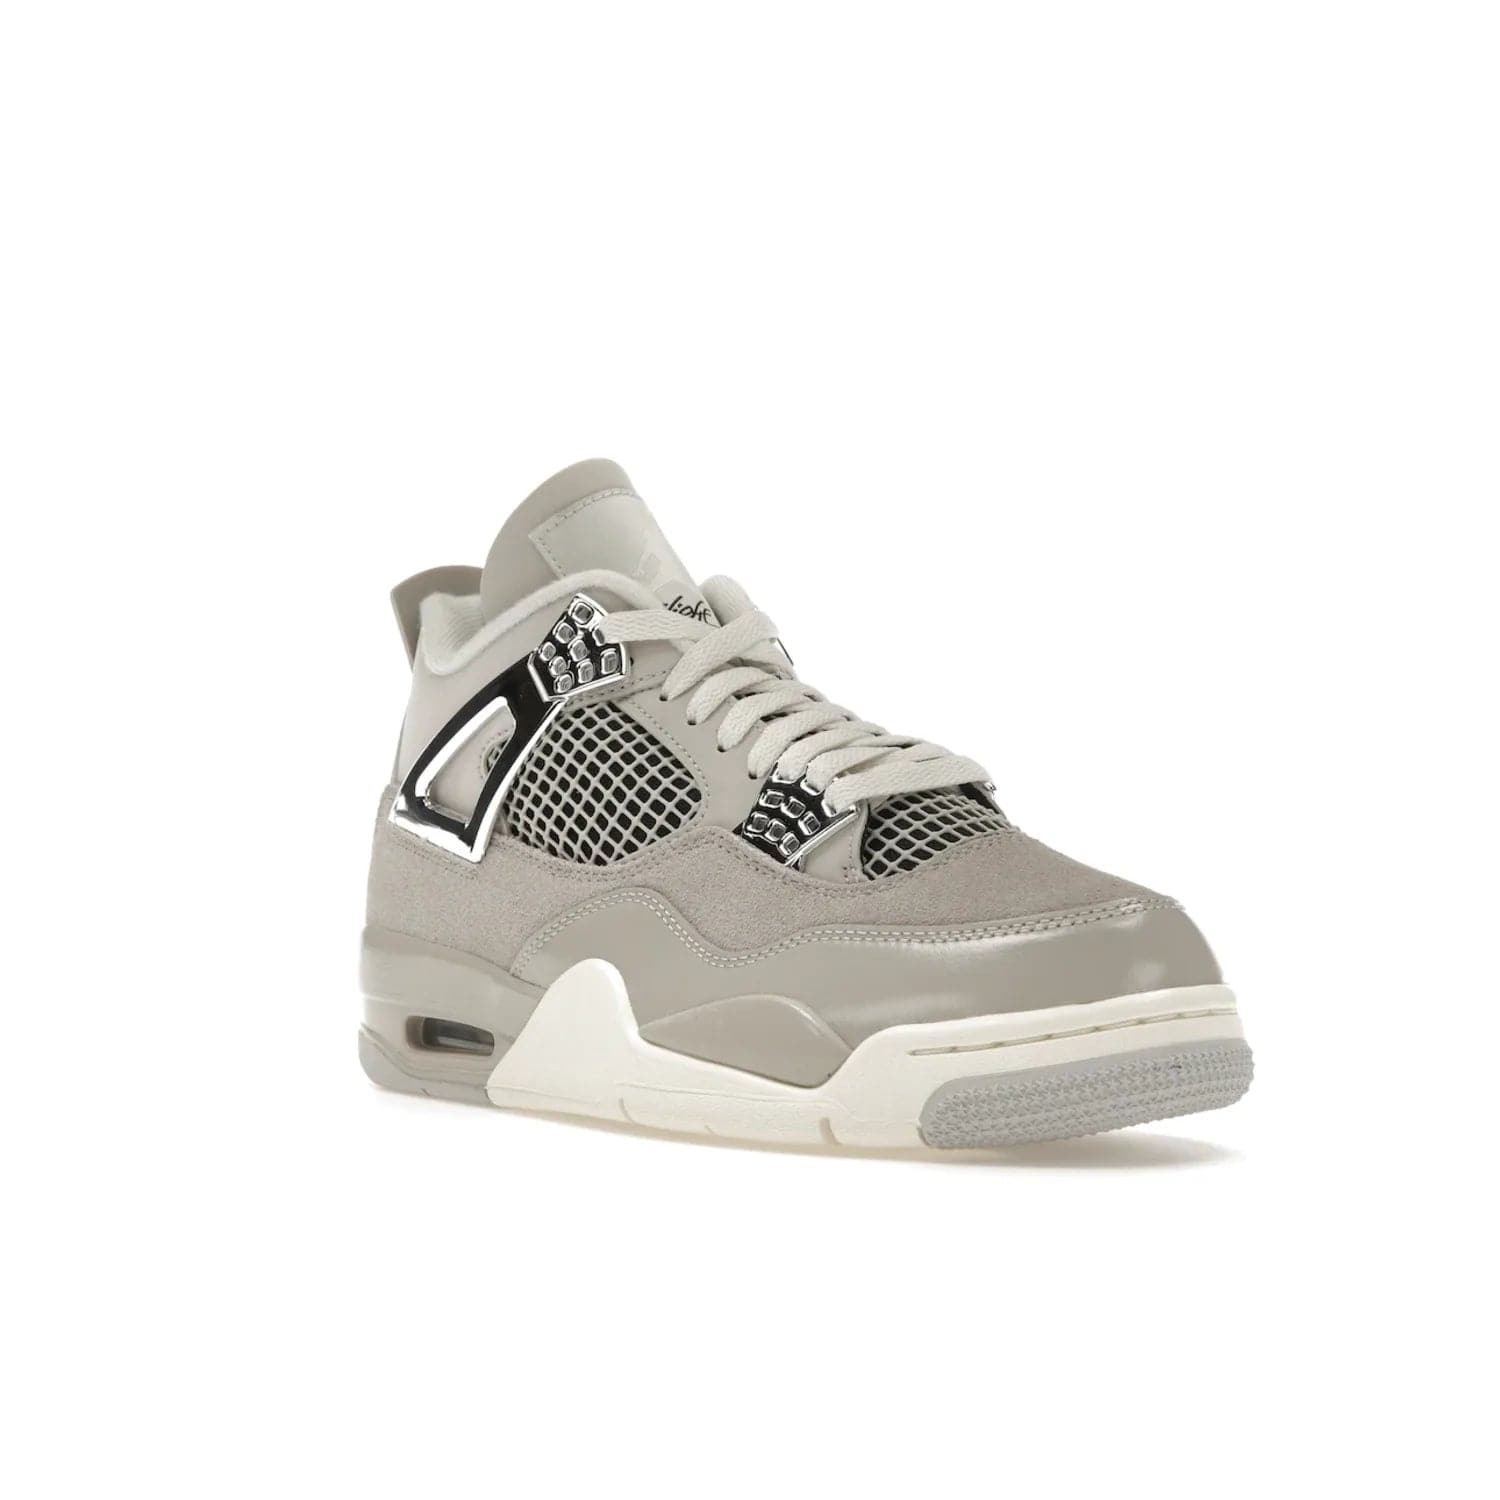 Jordan 4 Retro Frozen Moments (Women's) - Image 6 - Only at www.BallersClubKickz.com - The Jordan 4 Retro Frozen Moments is a stylish blend of classic design elements and modern tones. Featuring suede and leather overlays in a light iron-ore, sail, neutral grey, black, and metallic silver colorway. Get this iconic high-performance sneaker for $210.